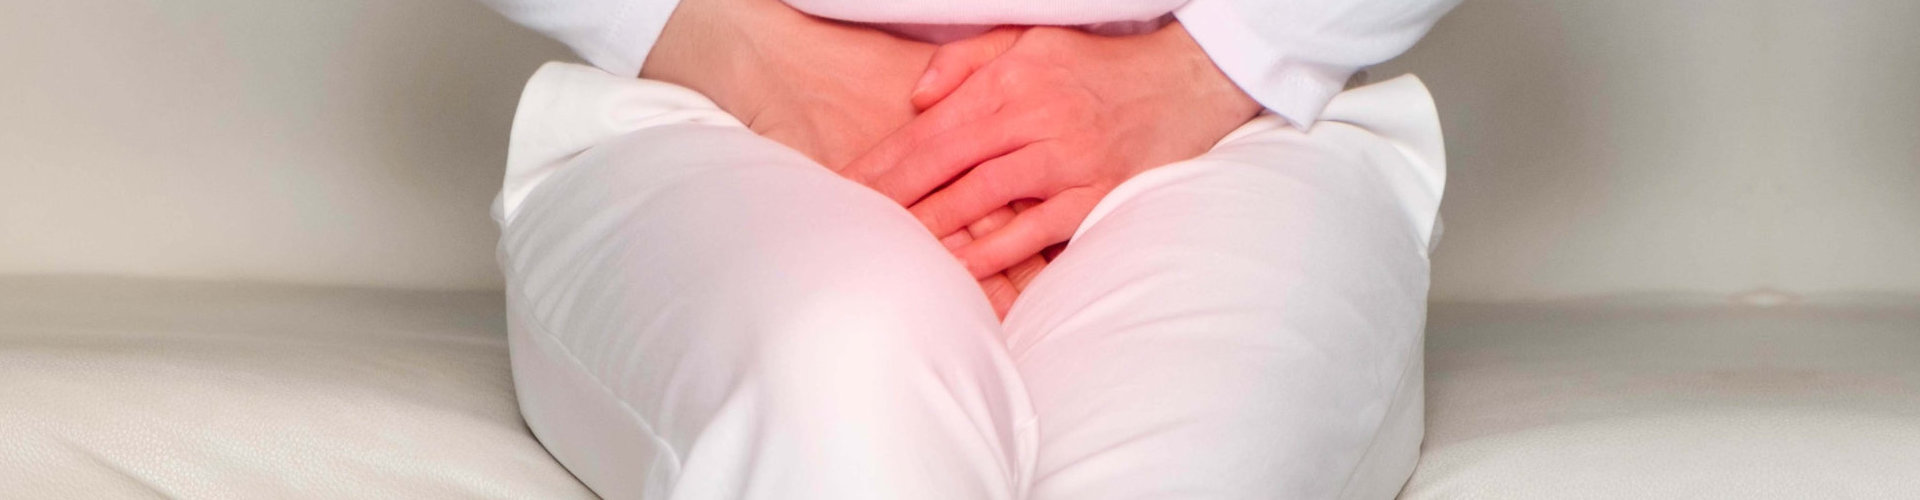 woman with hands holding her crotch in pain. Bladder pain.